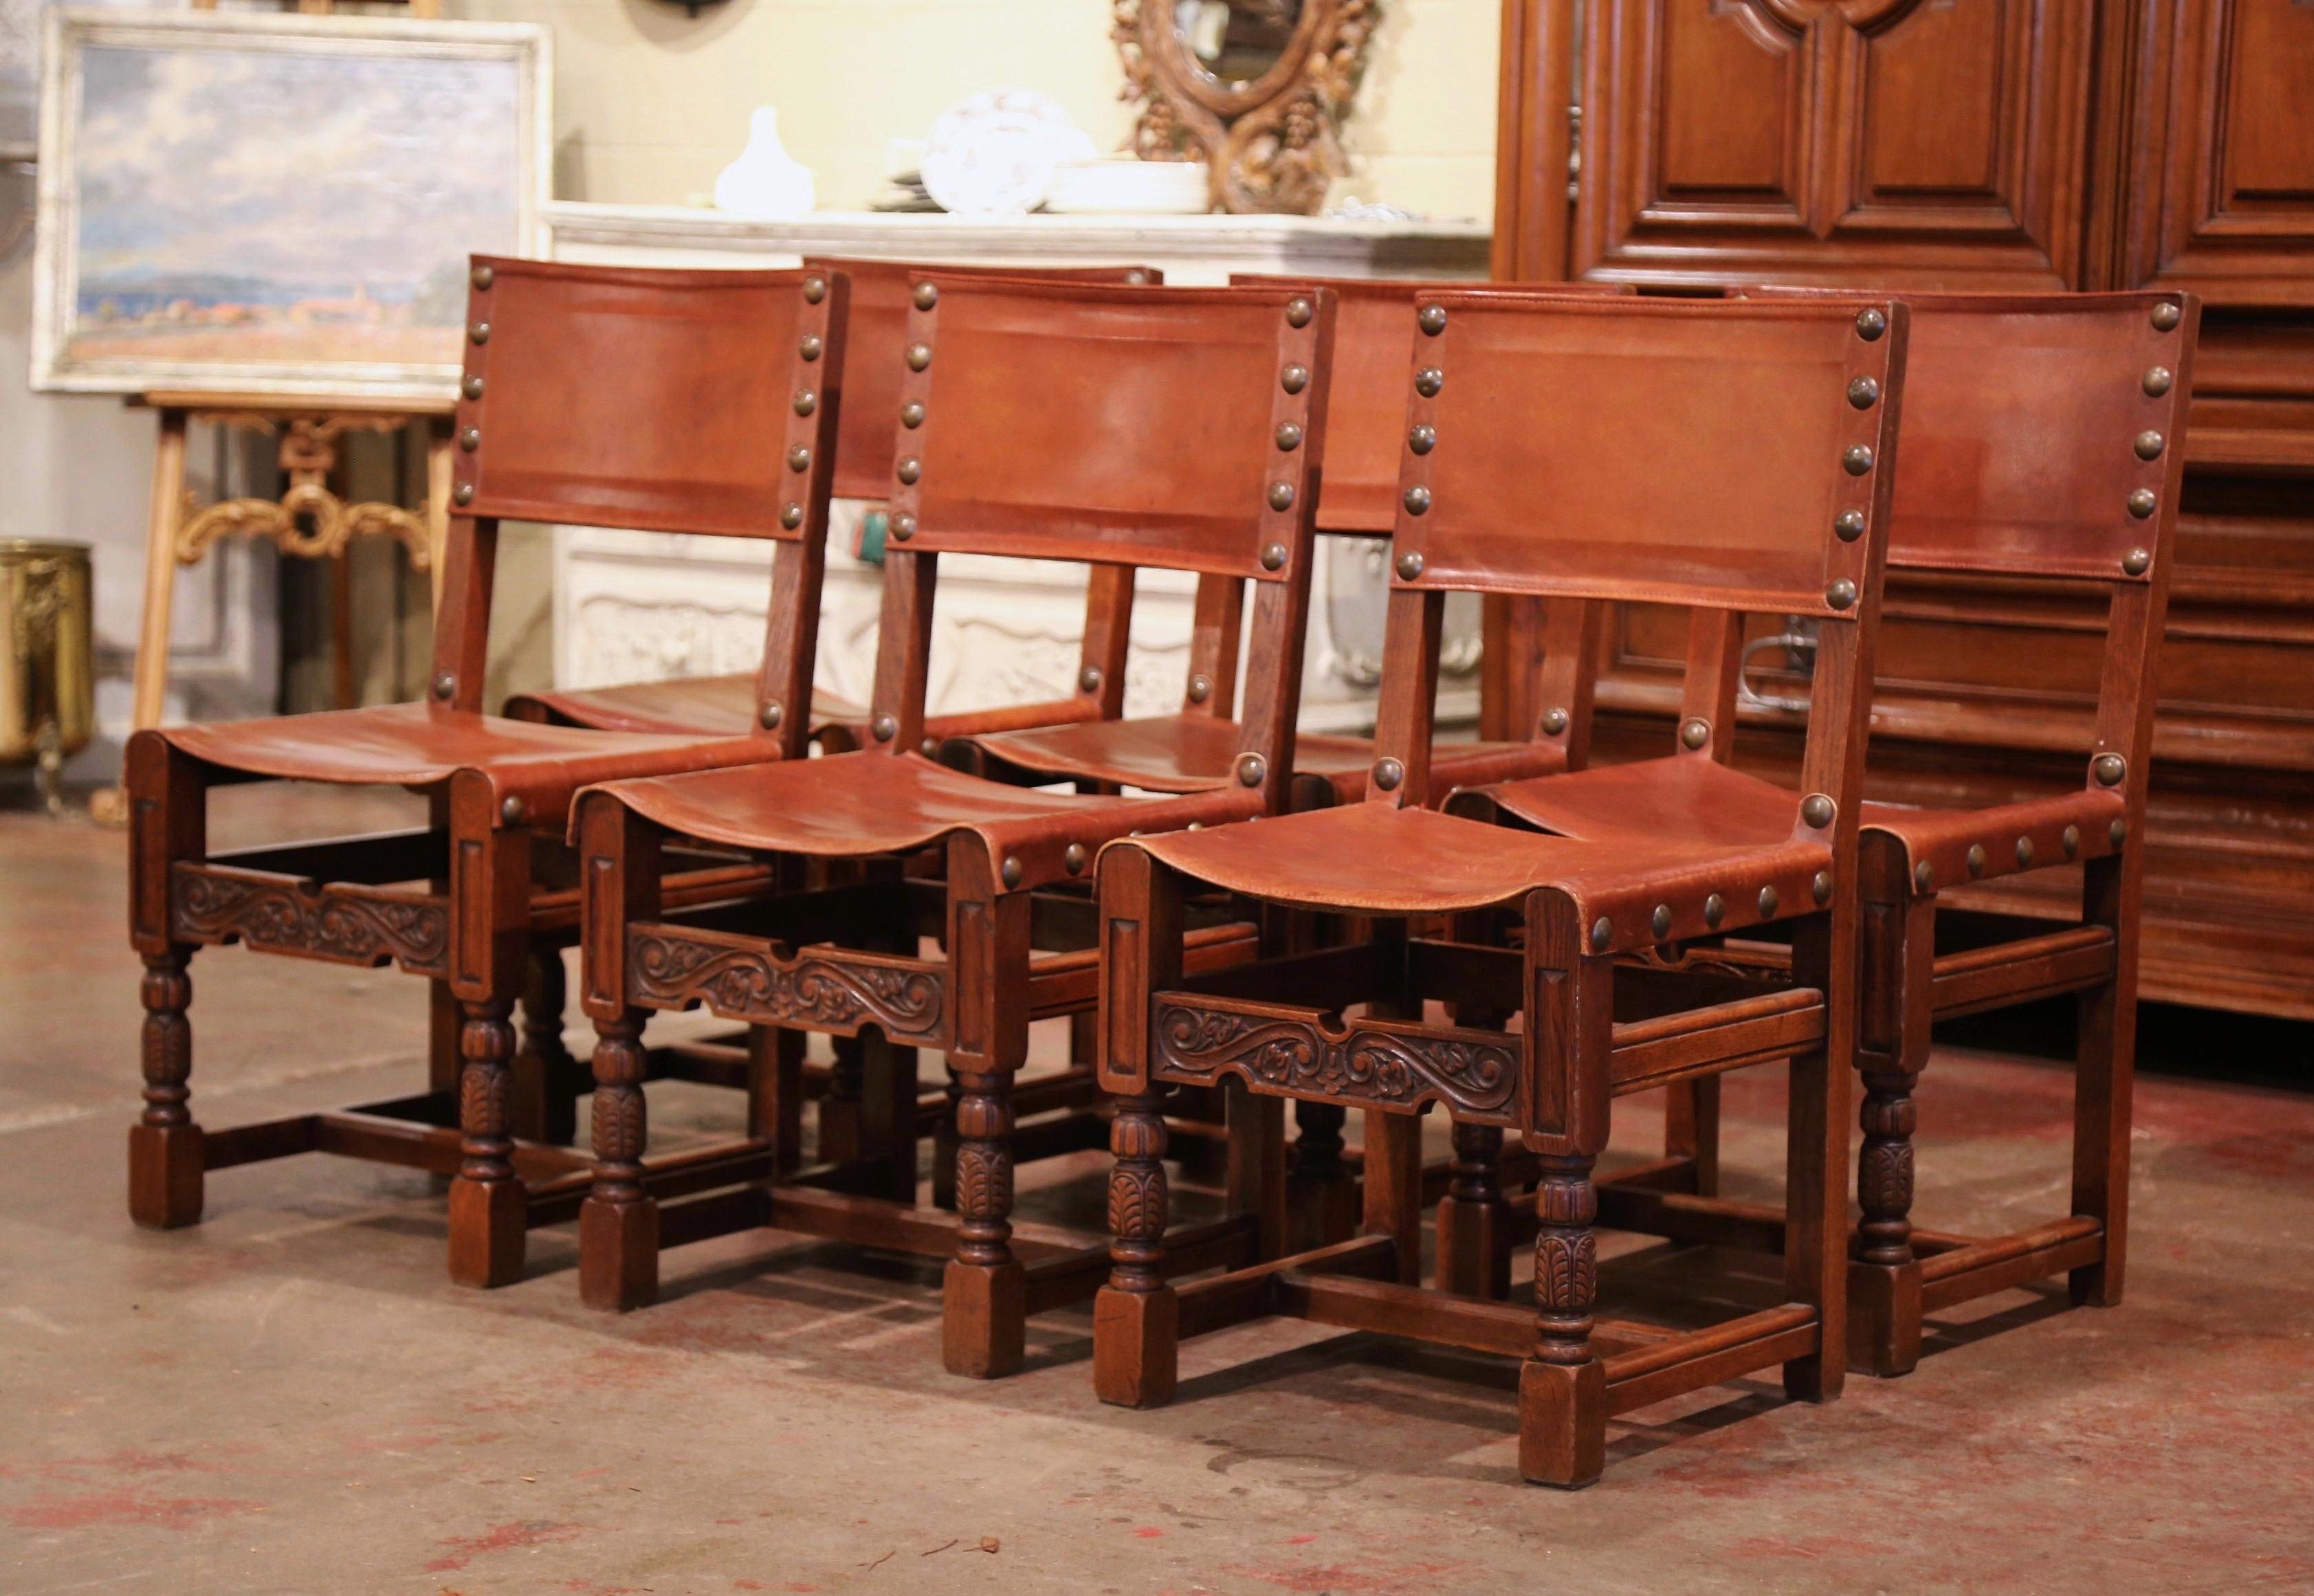 Decorate a breakfast room table with this comfortable set of antique chairs; crafted in France circa 1880 and made of oak, each chair stands on turned legs decorated with acanthus leaf motifs over a carved apron with floral decor. The rectangular